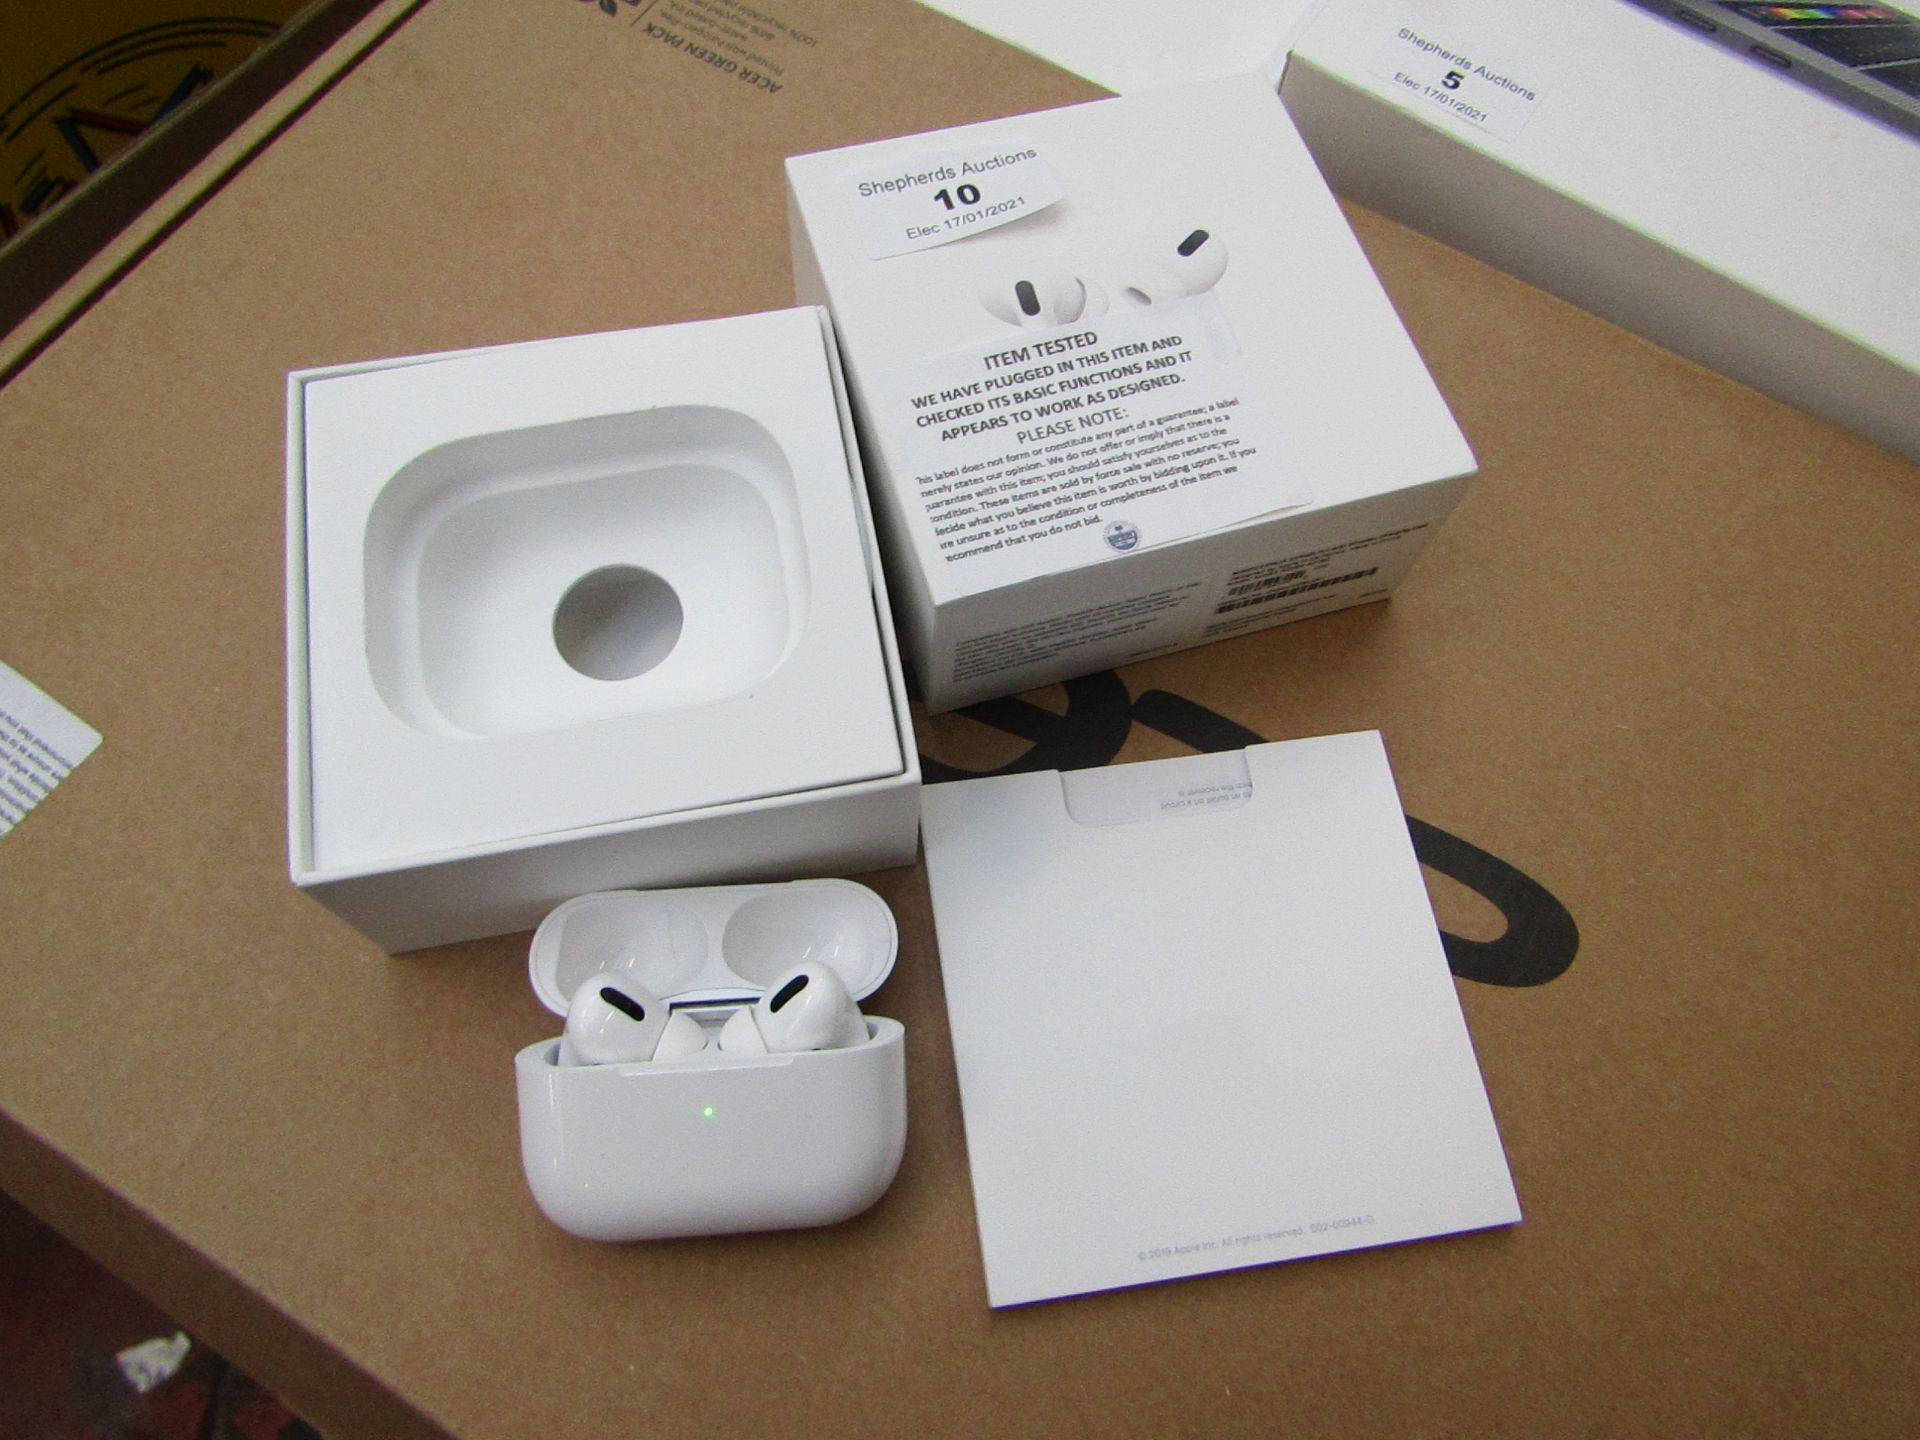 Apple AirPods Pro, tested working and boxed. RRP £219.00